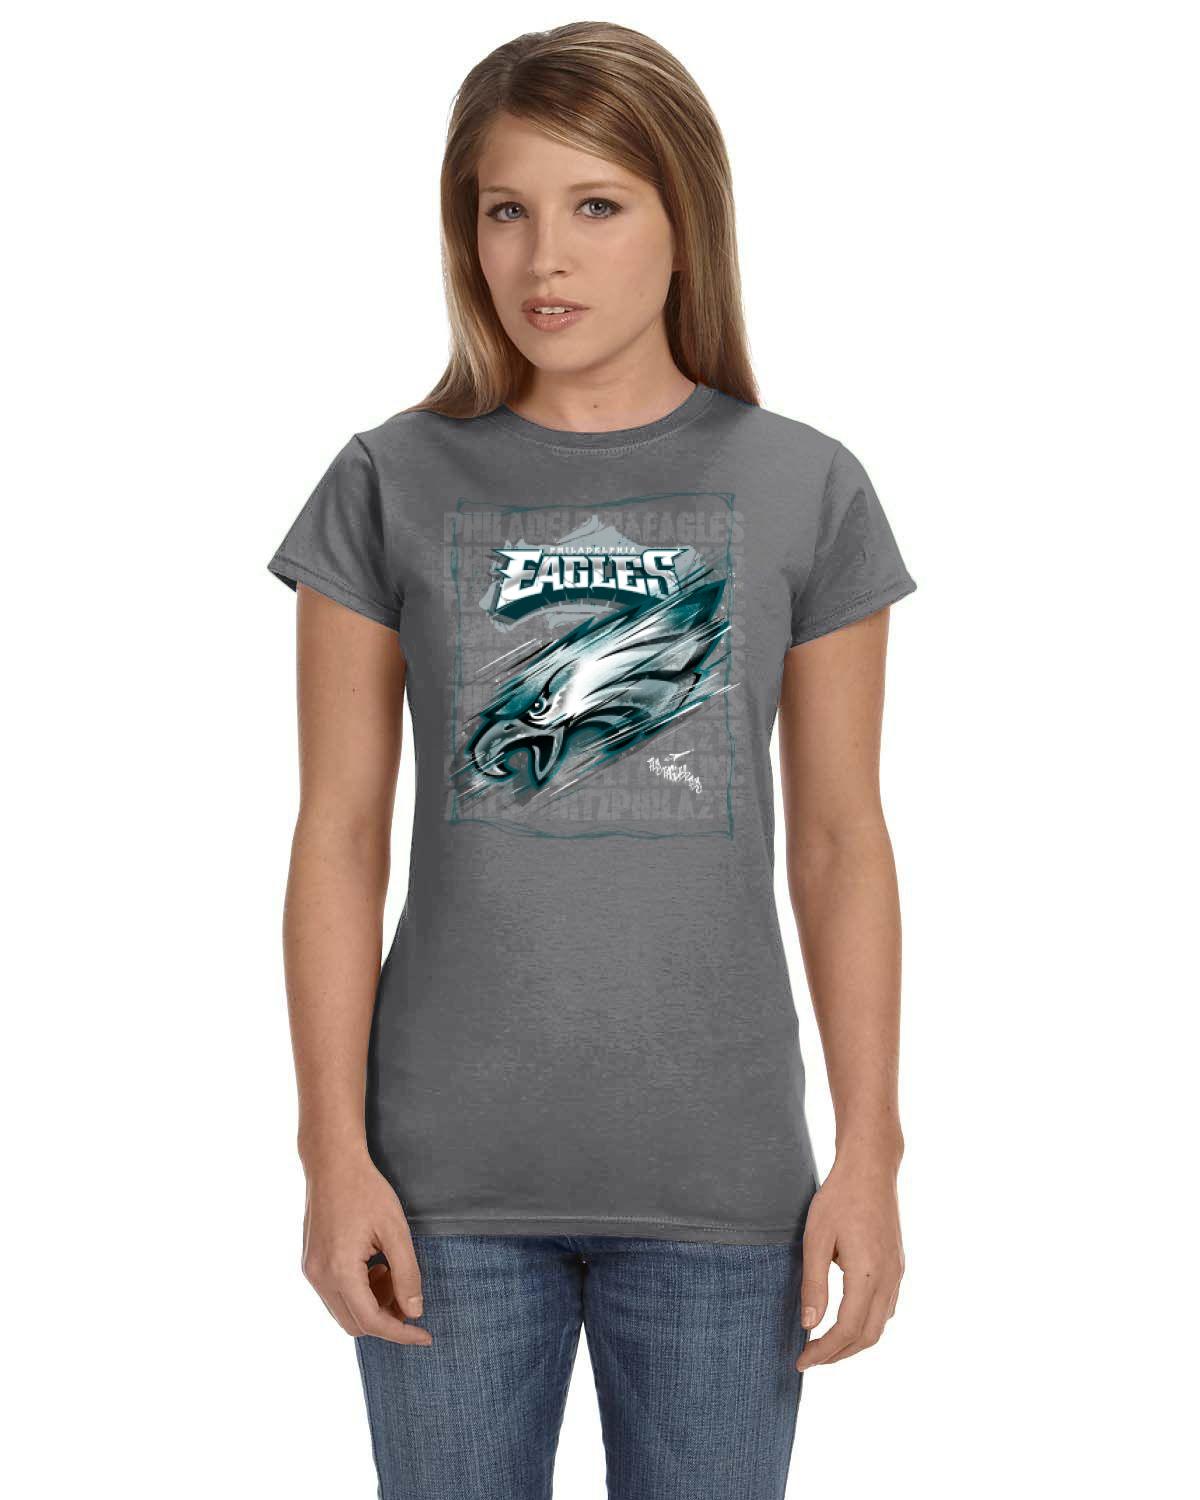 Fly Eagles Fly Ladies Tee (Gildan Ladies' Softstyle 7.5 oz./lin. yd. Fitted T-Shirt | G640L)